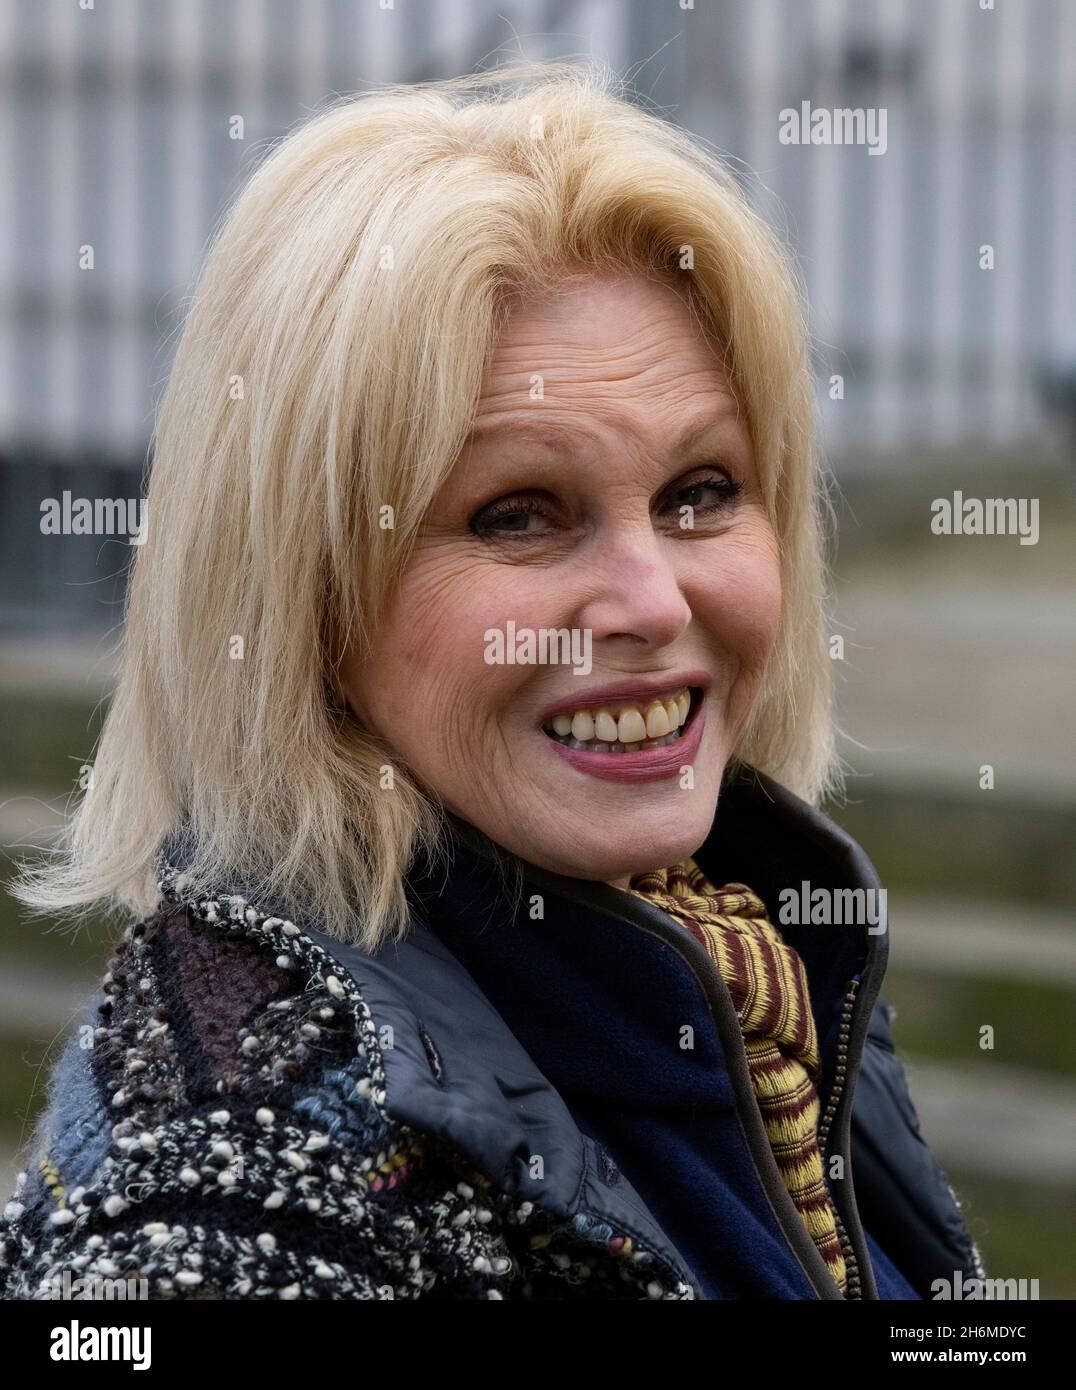 Actress, Environmentalist and campaigner, Joanna Lumley, in Westminster to promote a campaign to save the oceans. Stock Photo